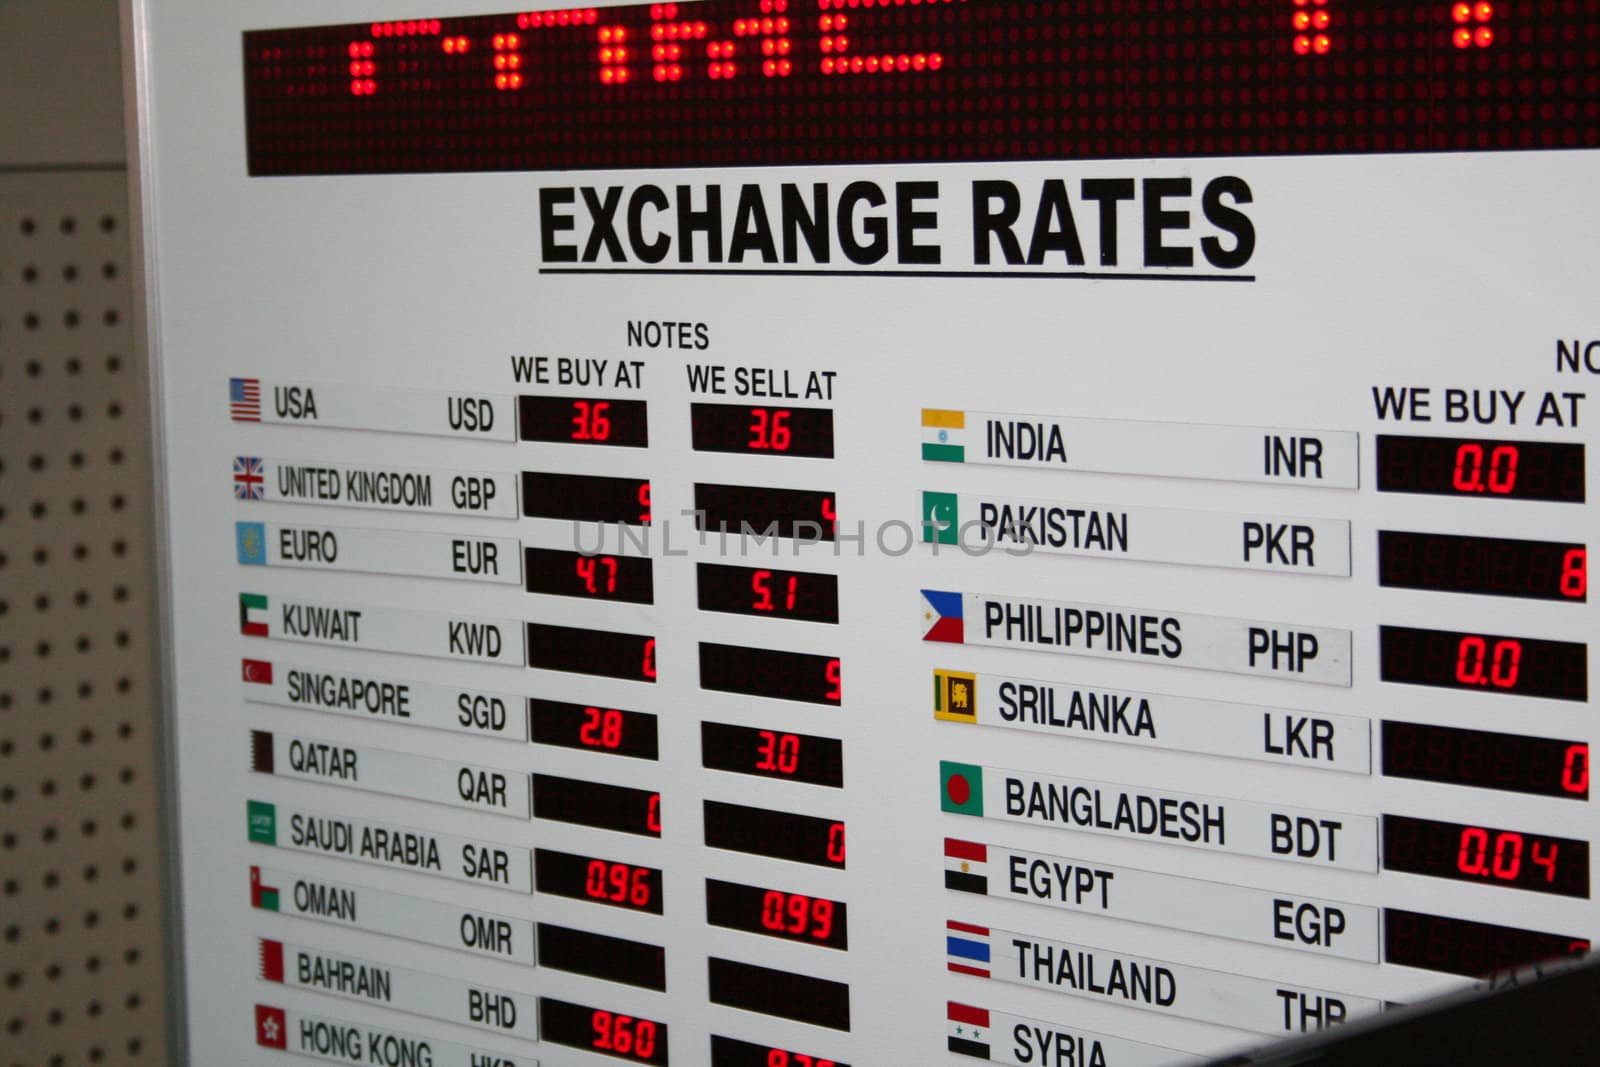 Scoreboard of excange rates from the airport